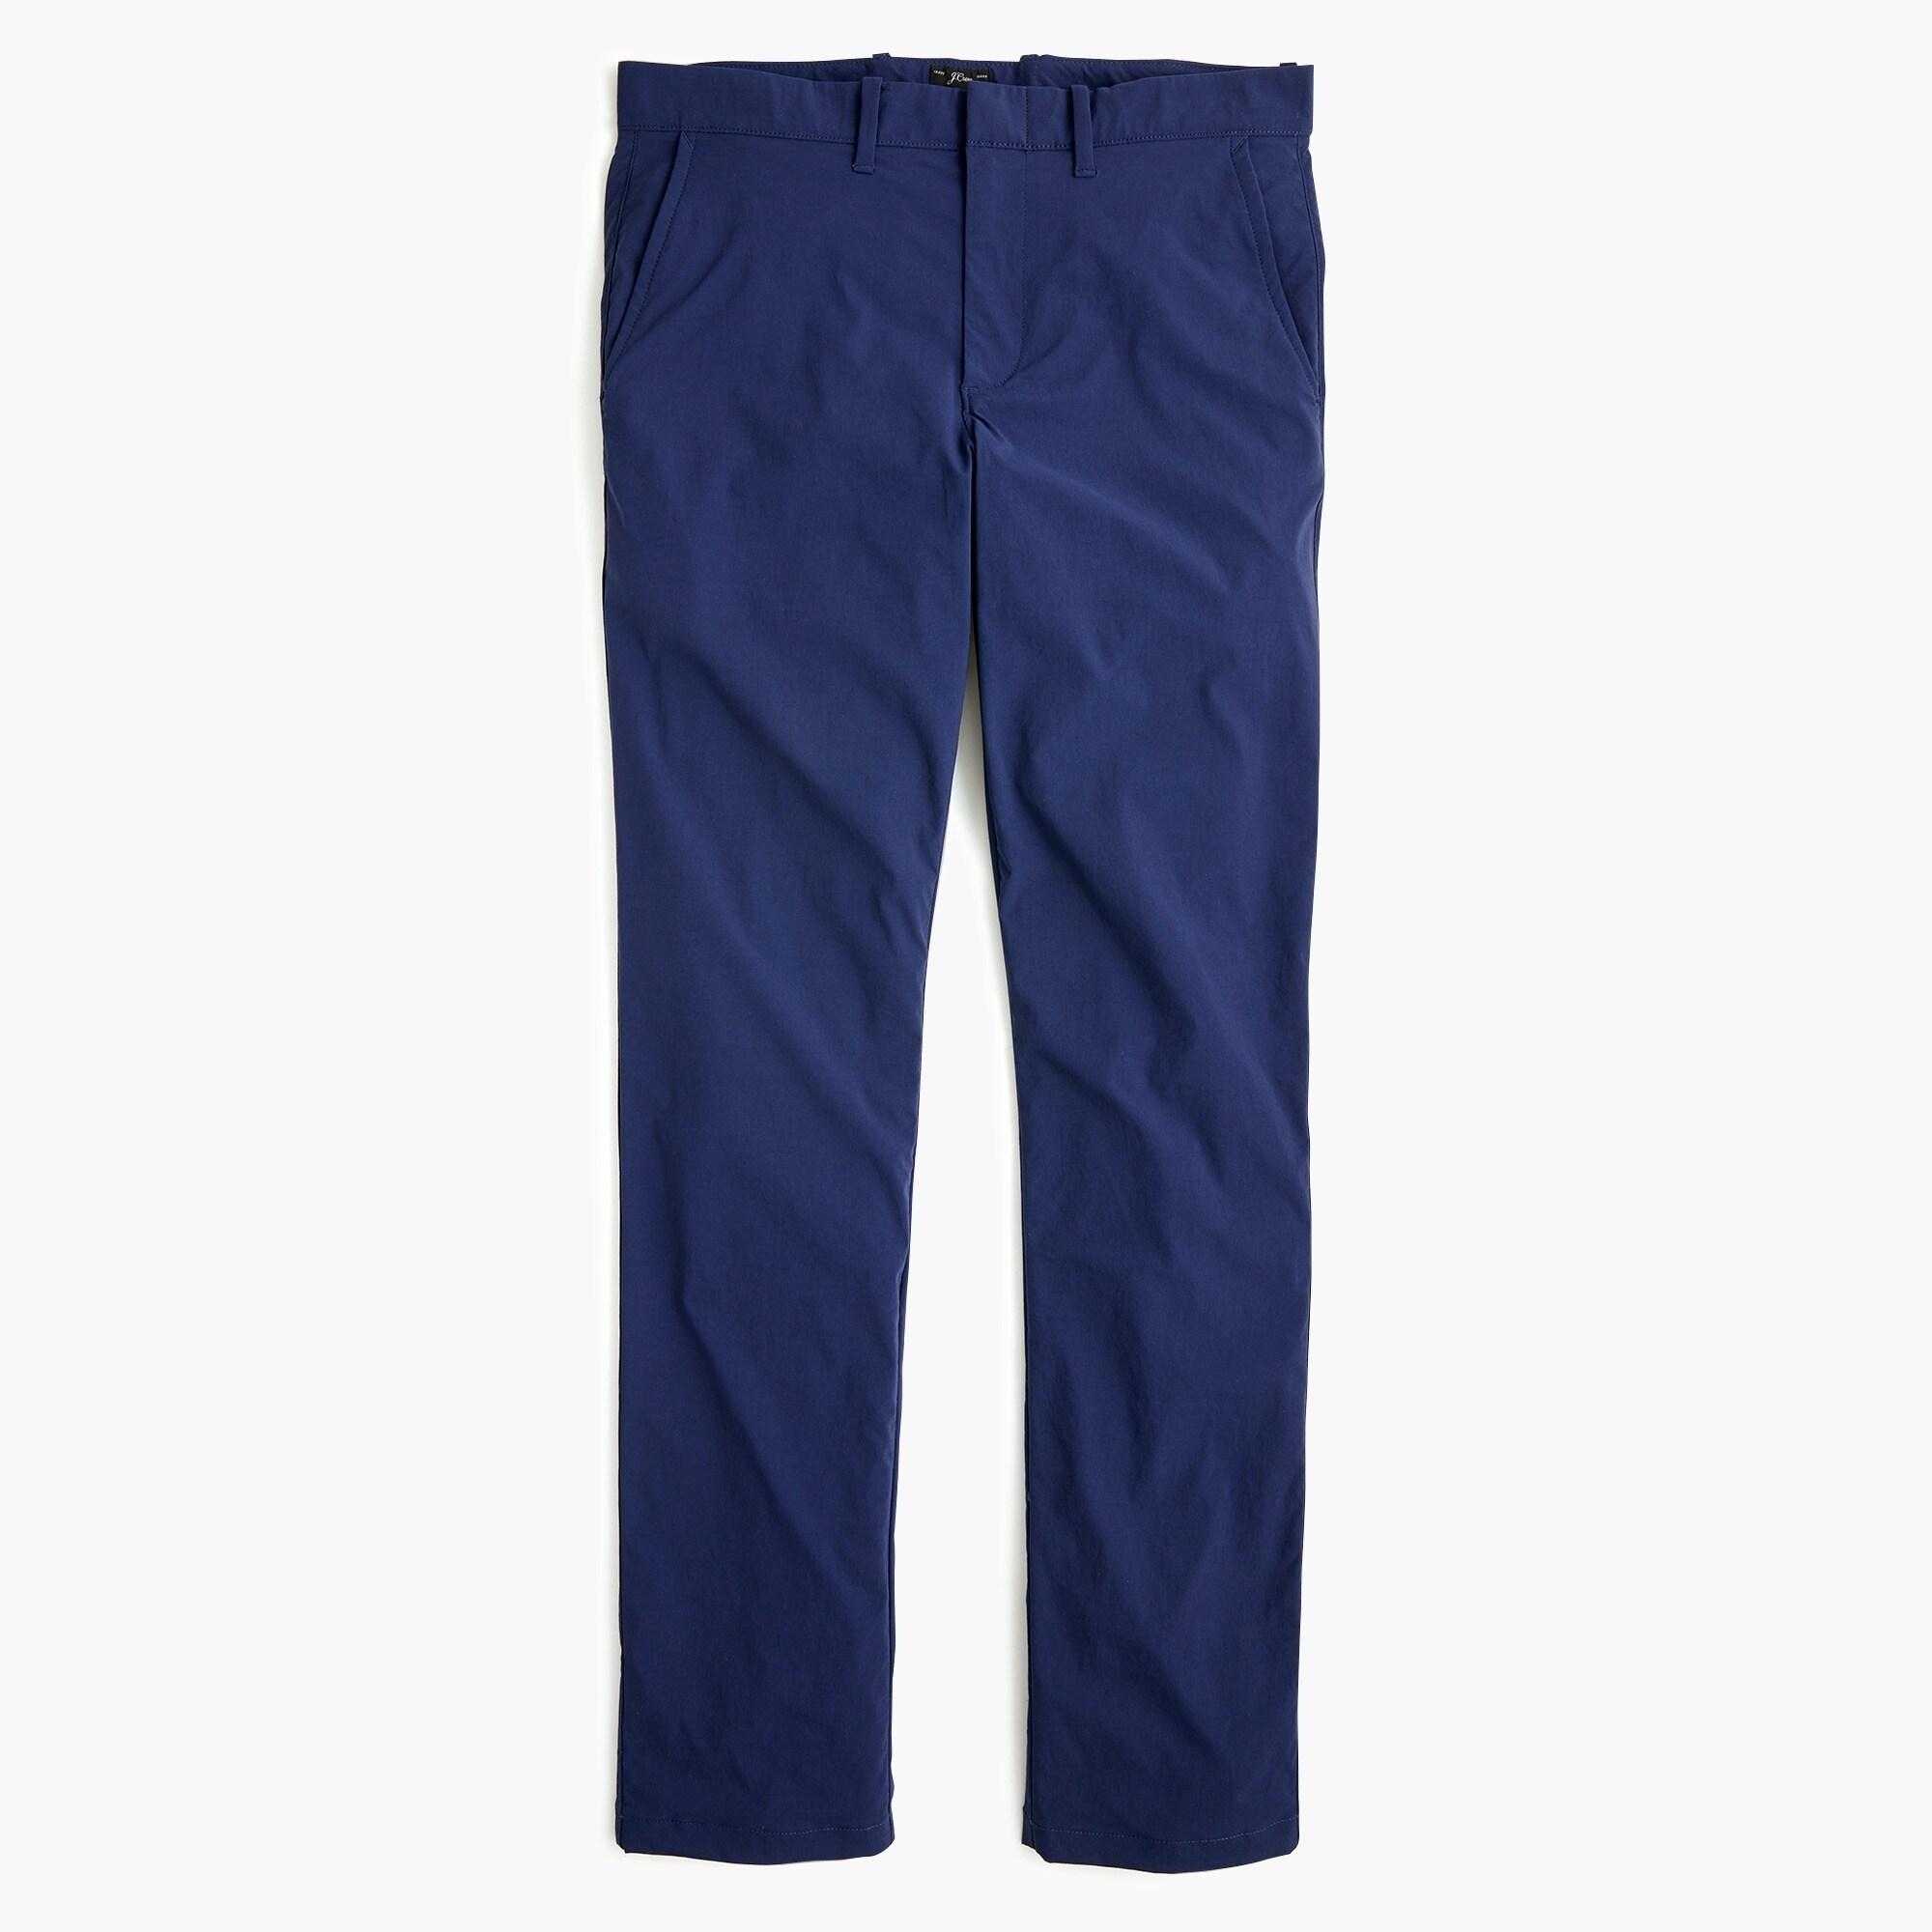 J.Crew Synthetic 770tm Straight-fit Tech Pant in Navy (Blue) for Men - Lyst